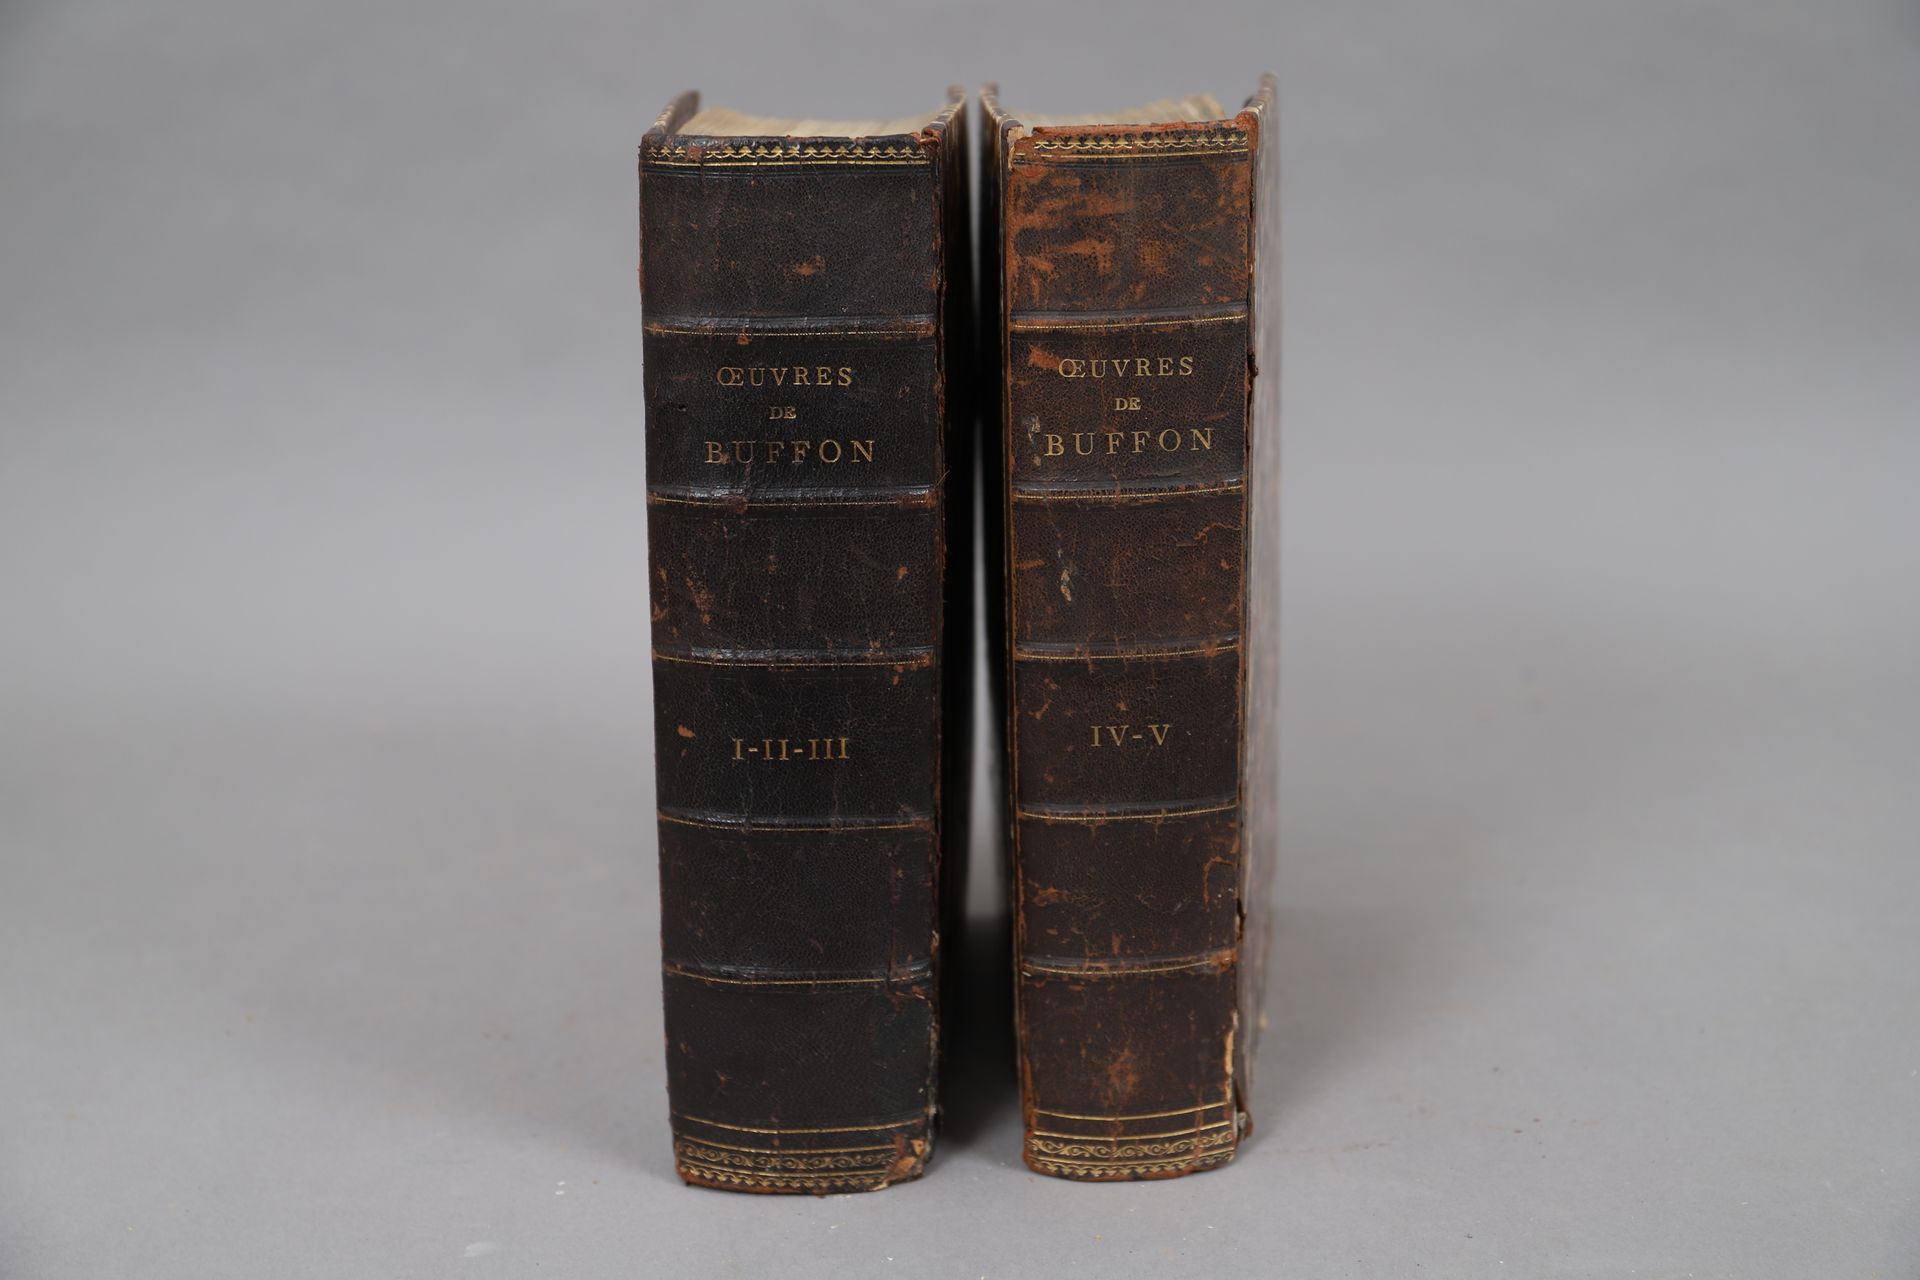 Null BUFFON'S WORKS

5 volumes bound in two volumes.